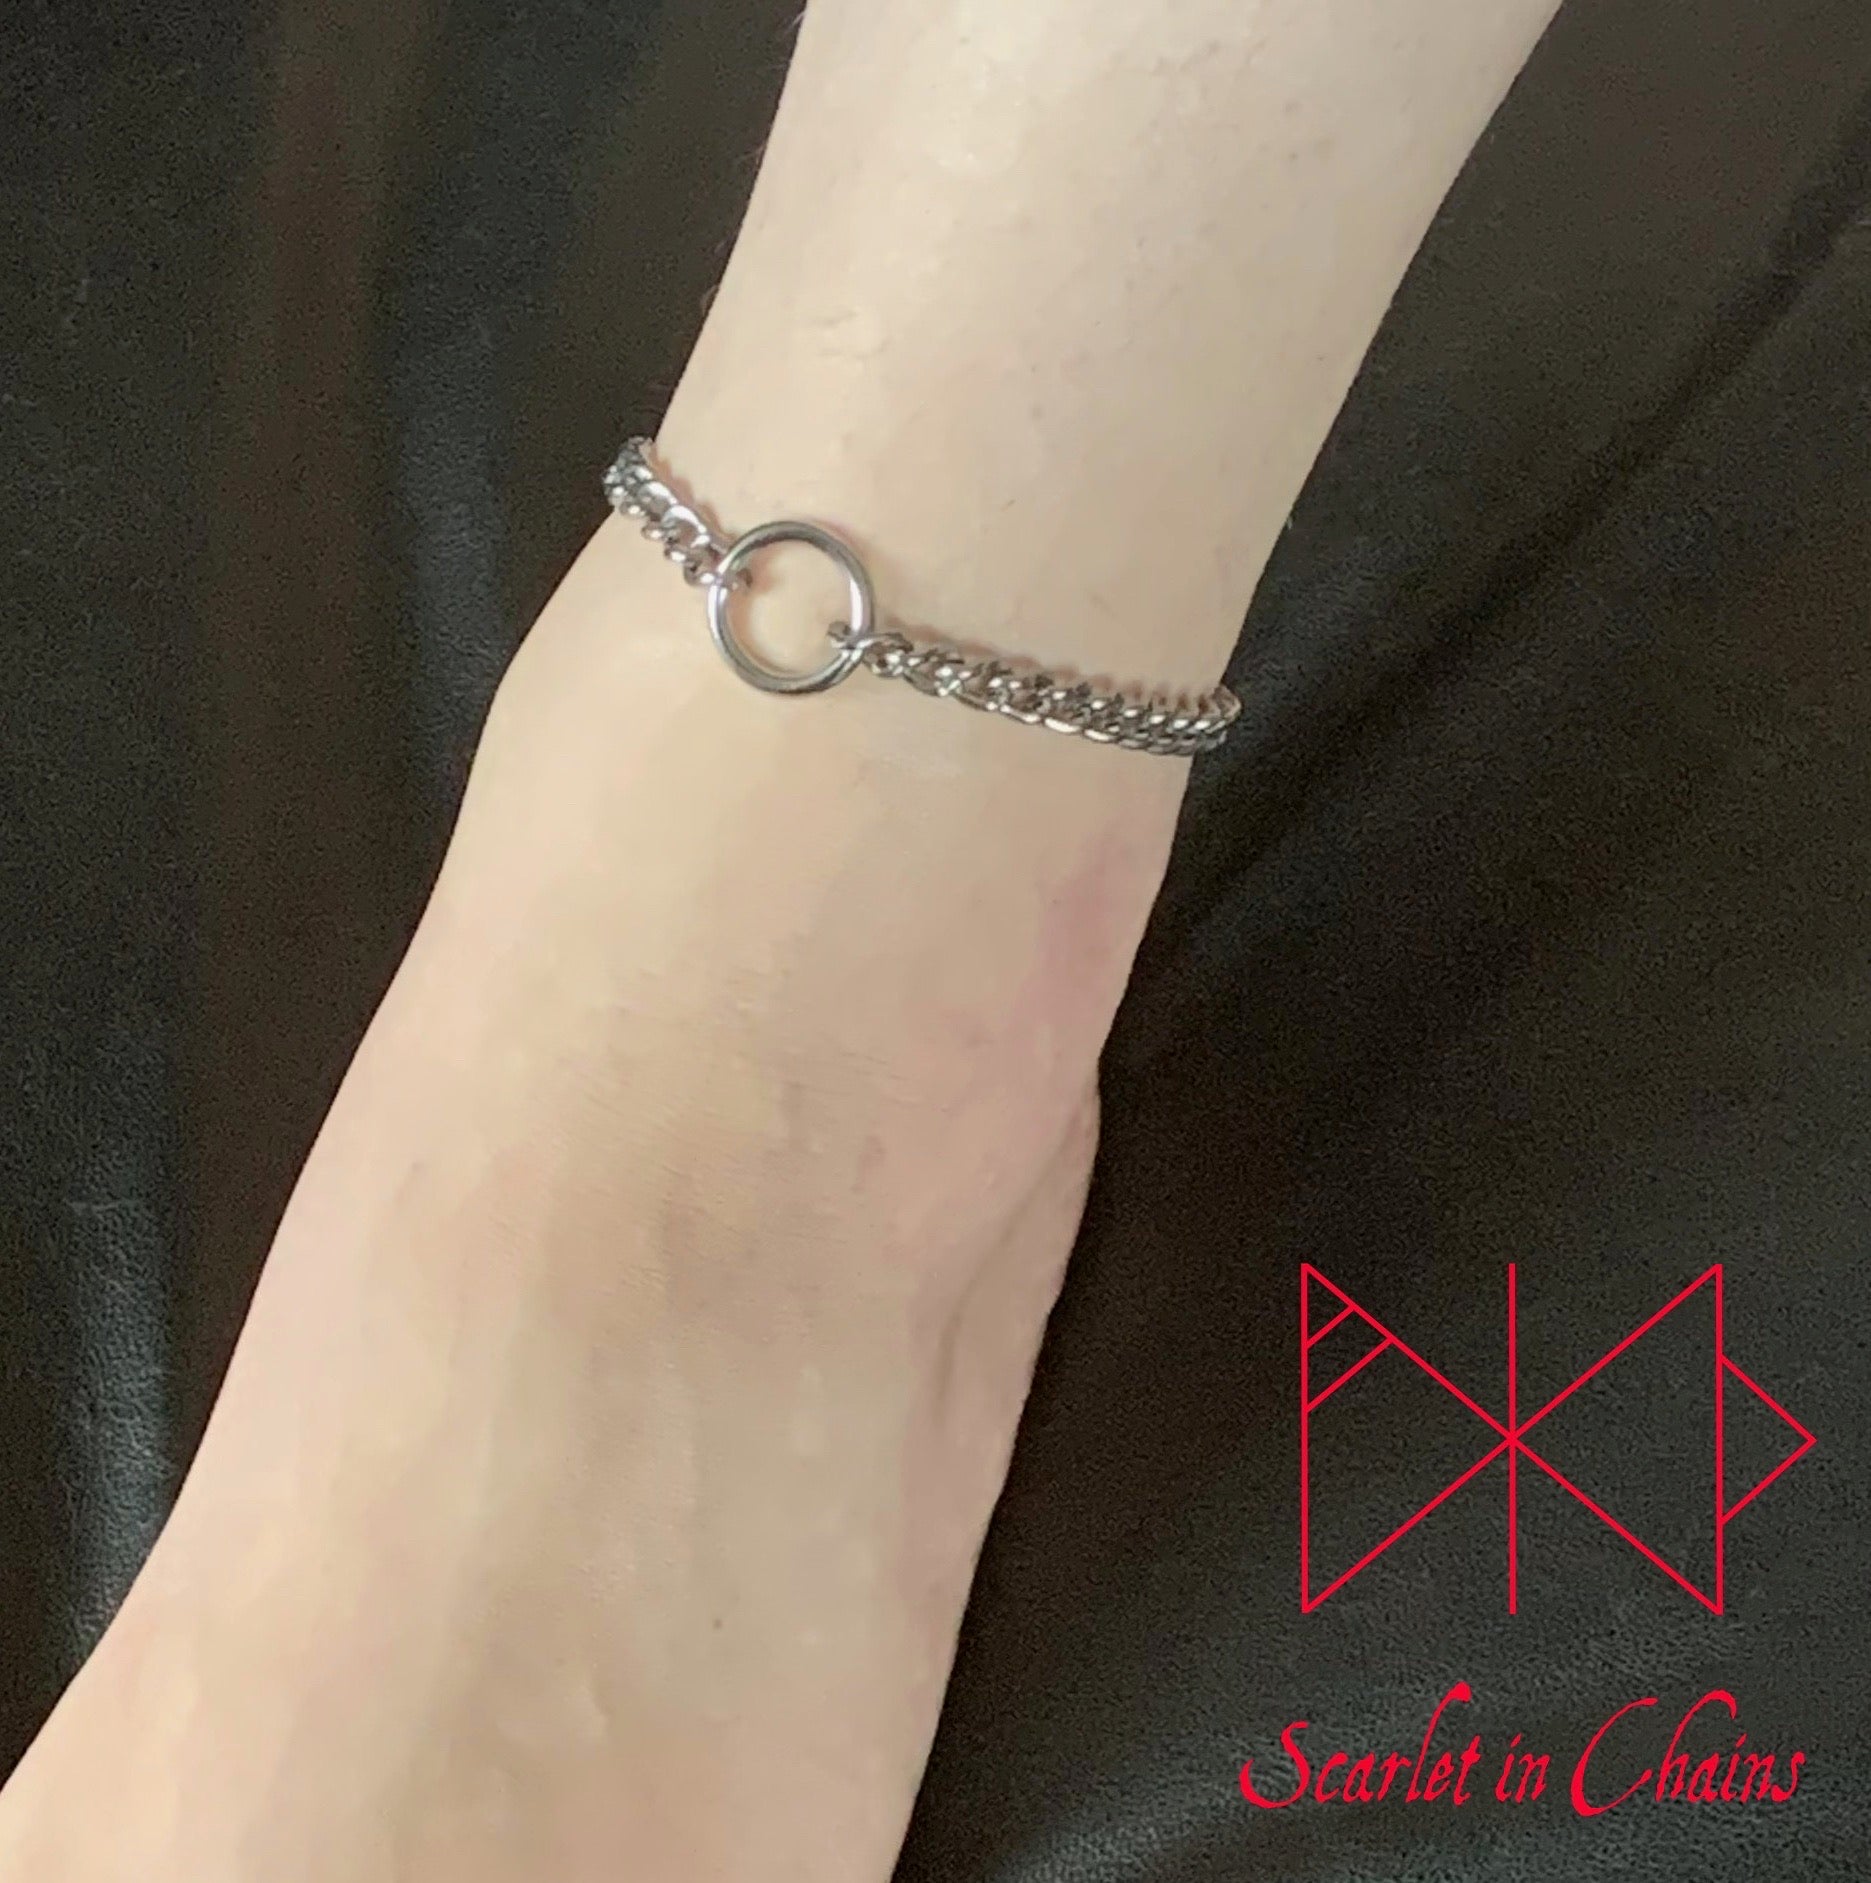 Micro Luna Anklet - Stainless Steel Ankle Cuff - Shown Warn